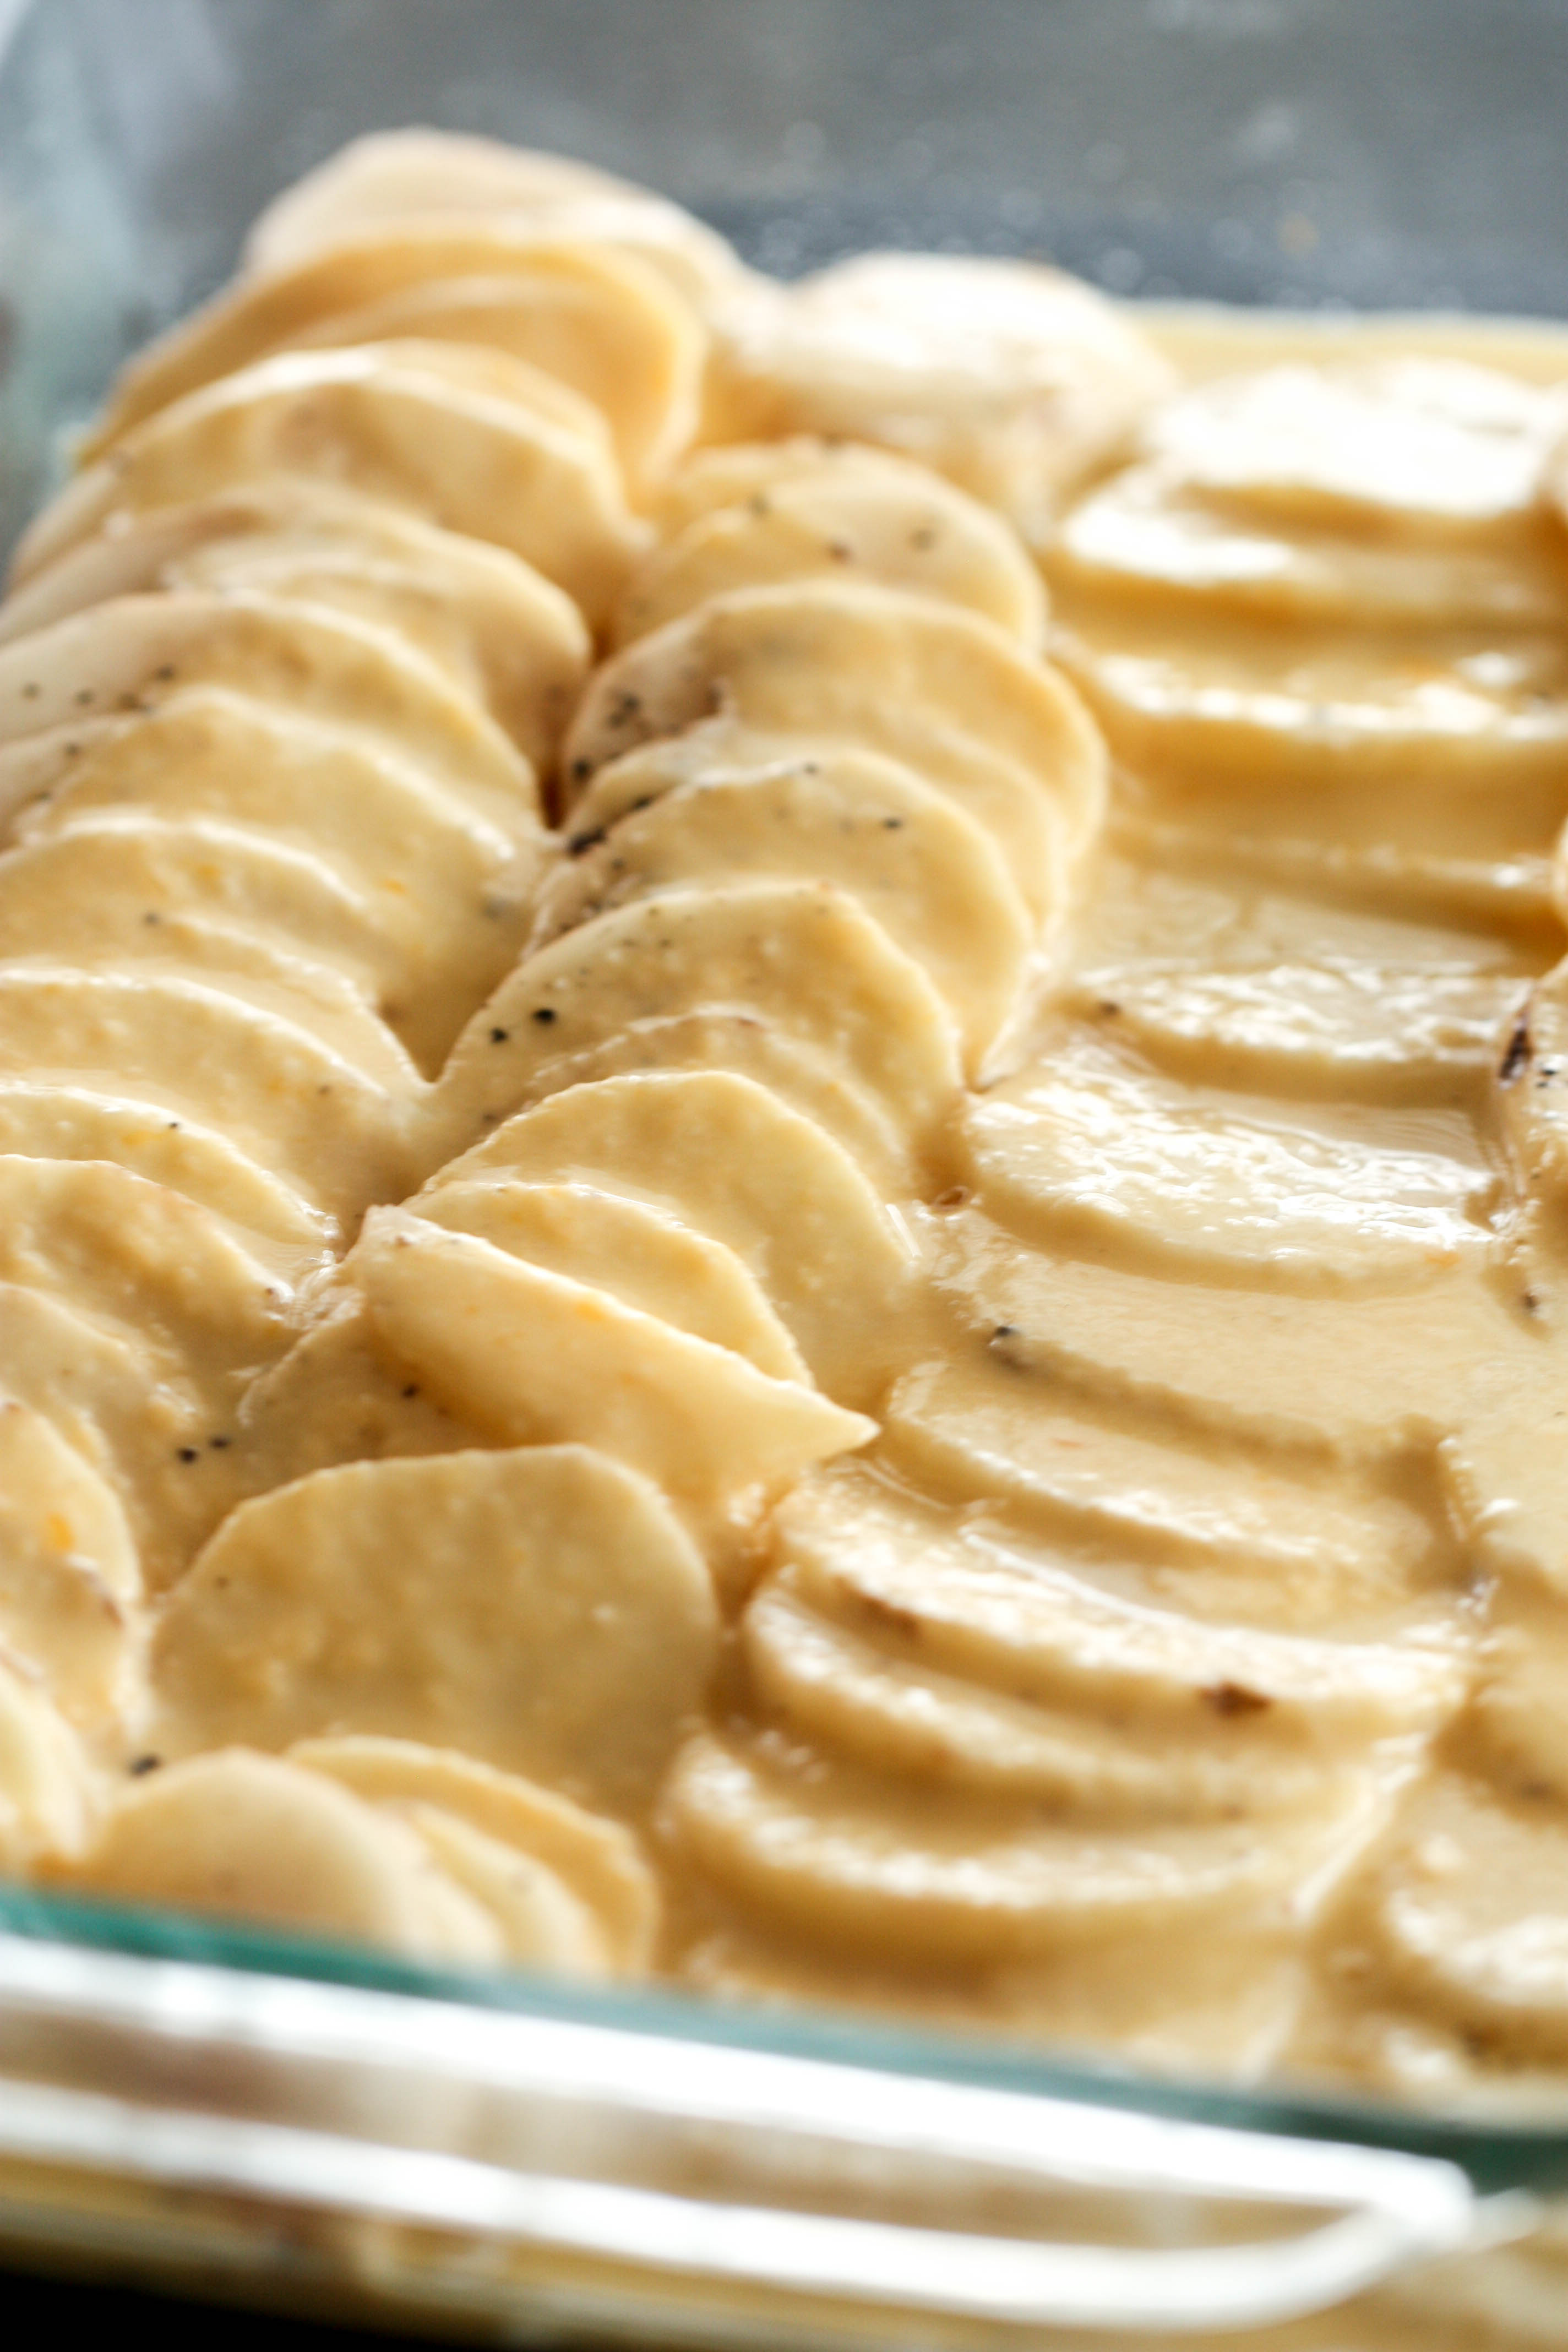 sliced potatoes covered in cheese sauce ready to bake